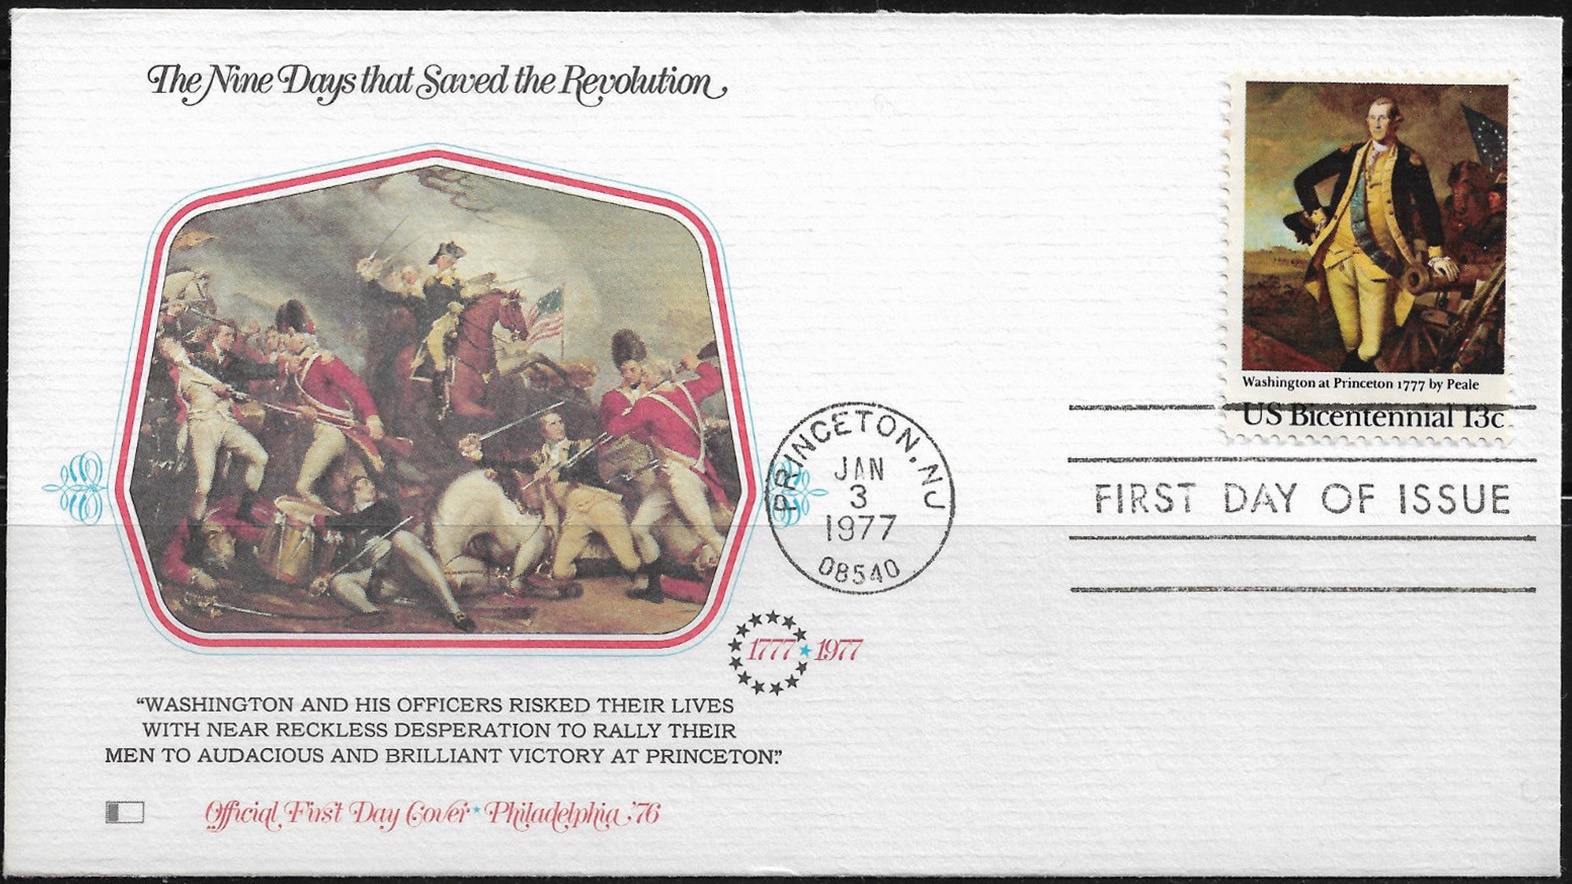 United States - Scott #1704 (1977) first day cover; Fleetwood cachet